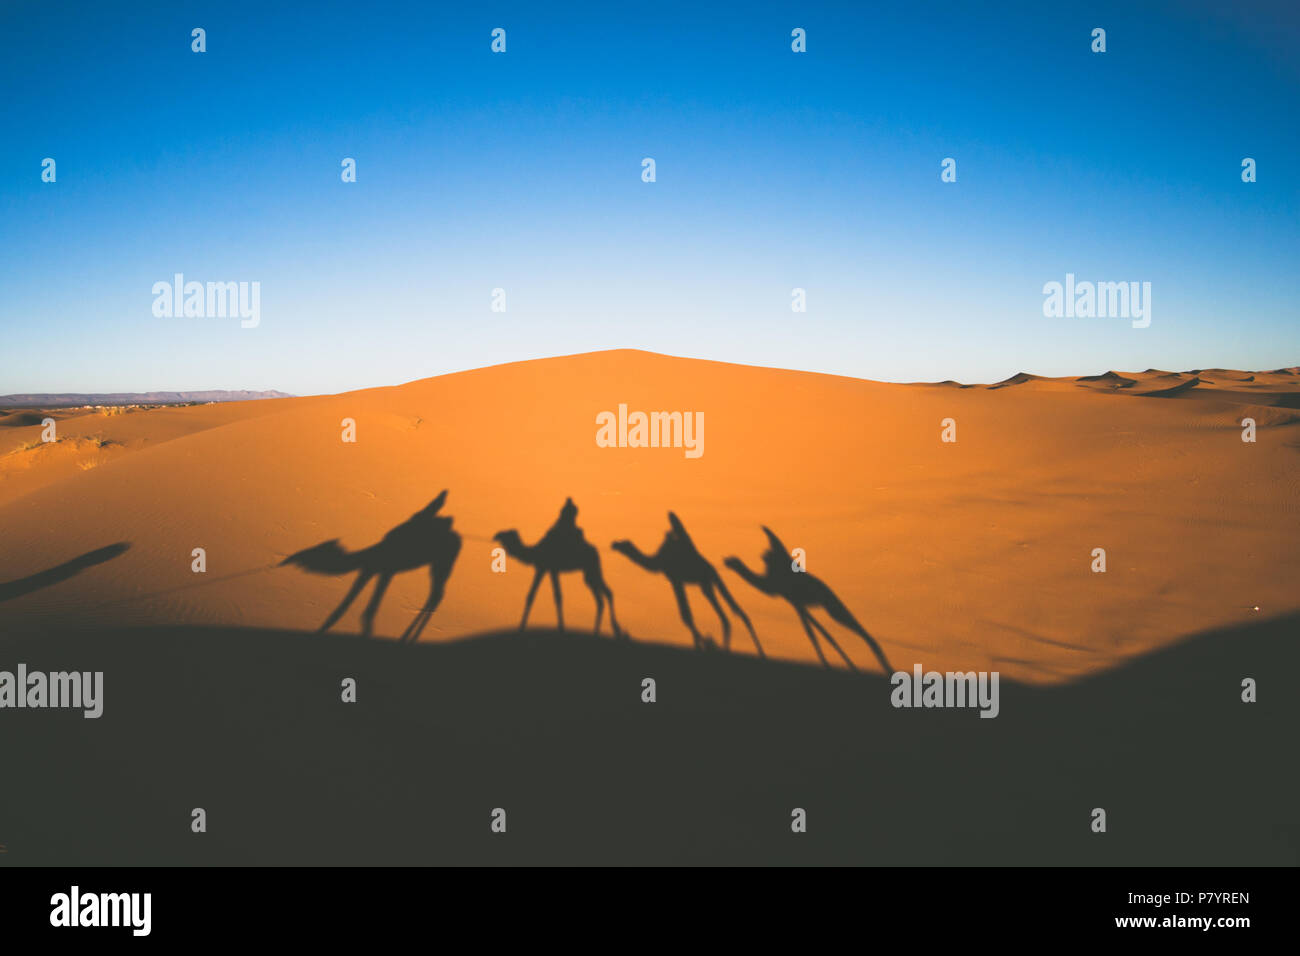 Vintage looking image of people riding camels in caravan over the sand dunes in Sahara desert with camel shadows on a sand Stock Photo